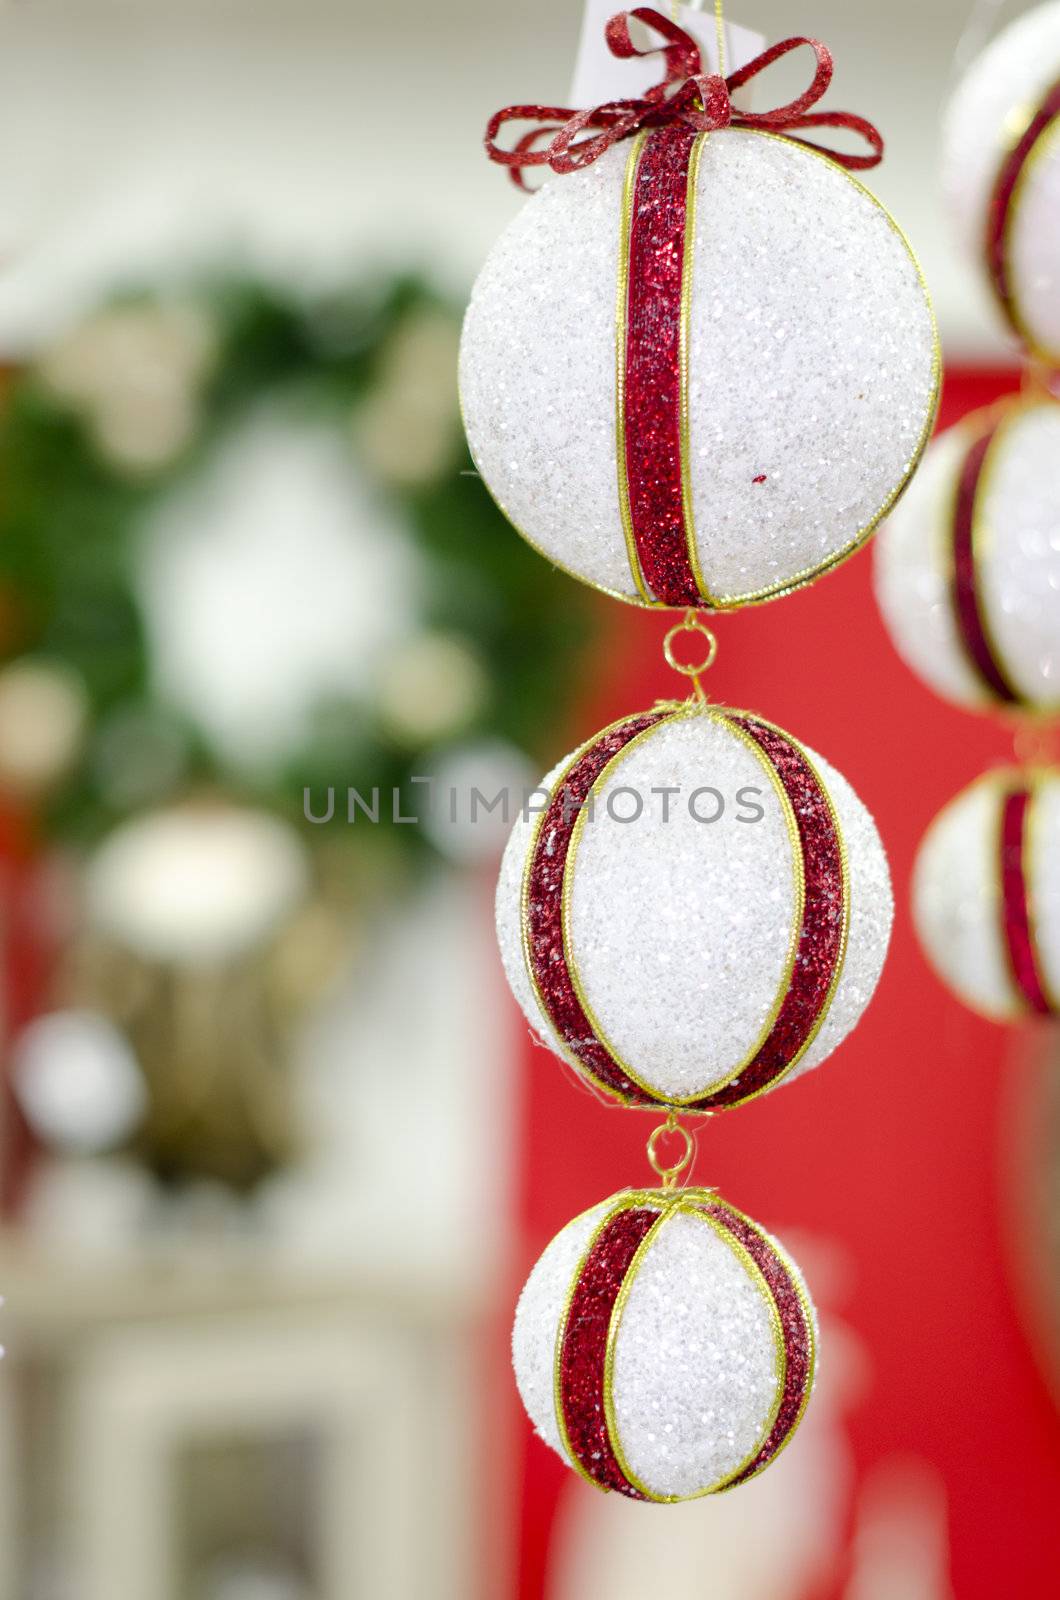 Merry Christmas and Happy new year, New Year's white ball with red ribon on a red background abstract background lights